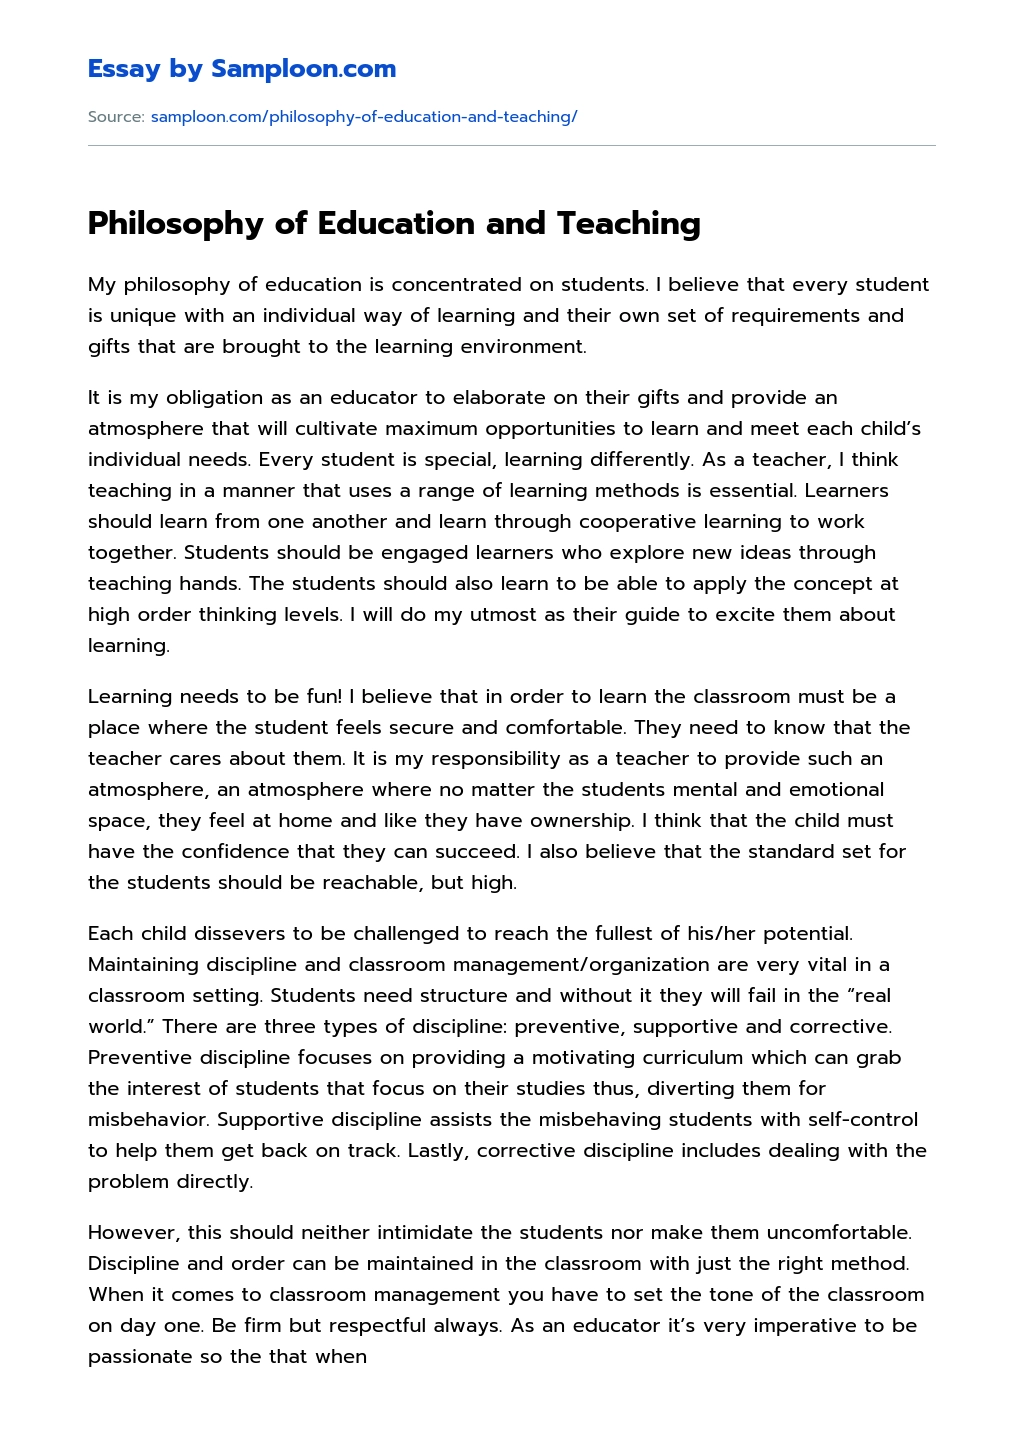 Philosophy of Education and Teaching essay